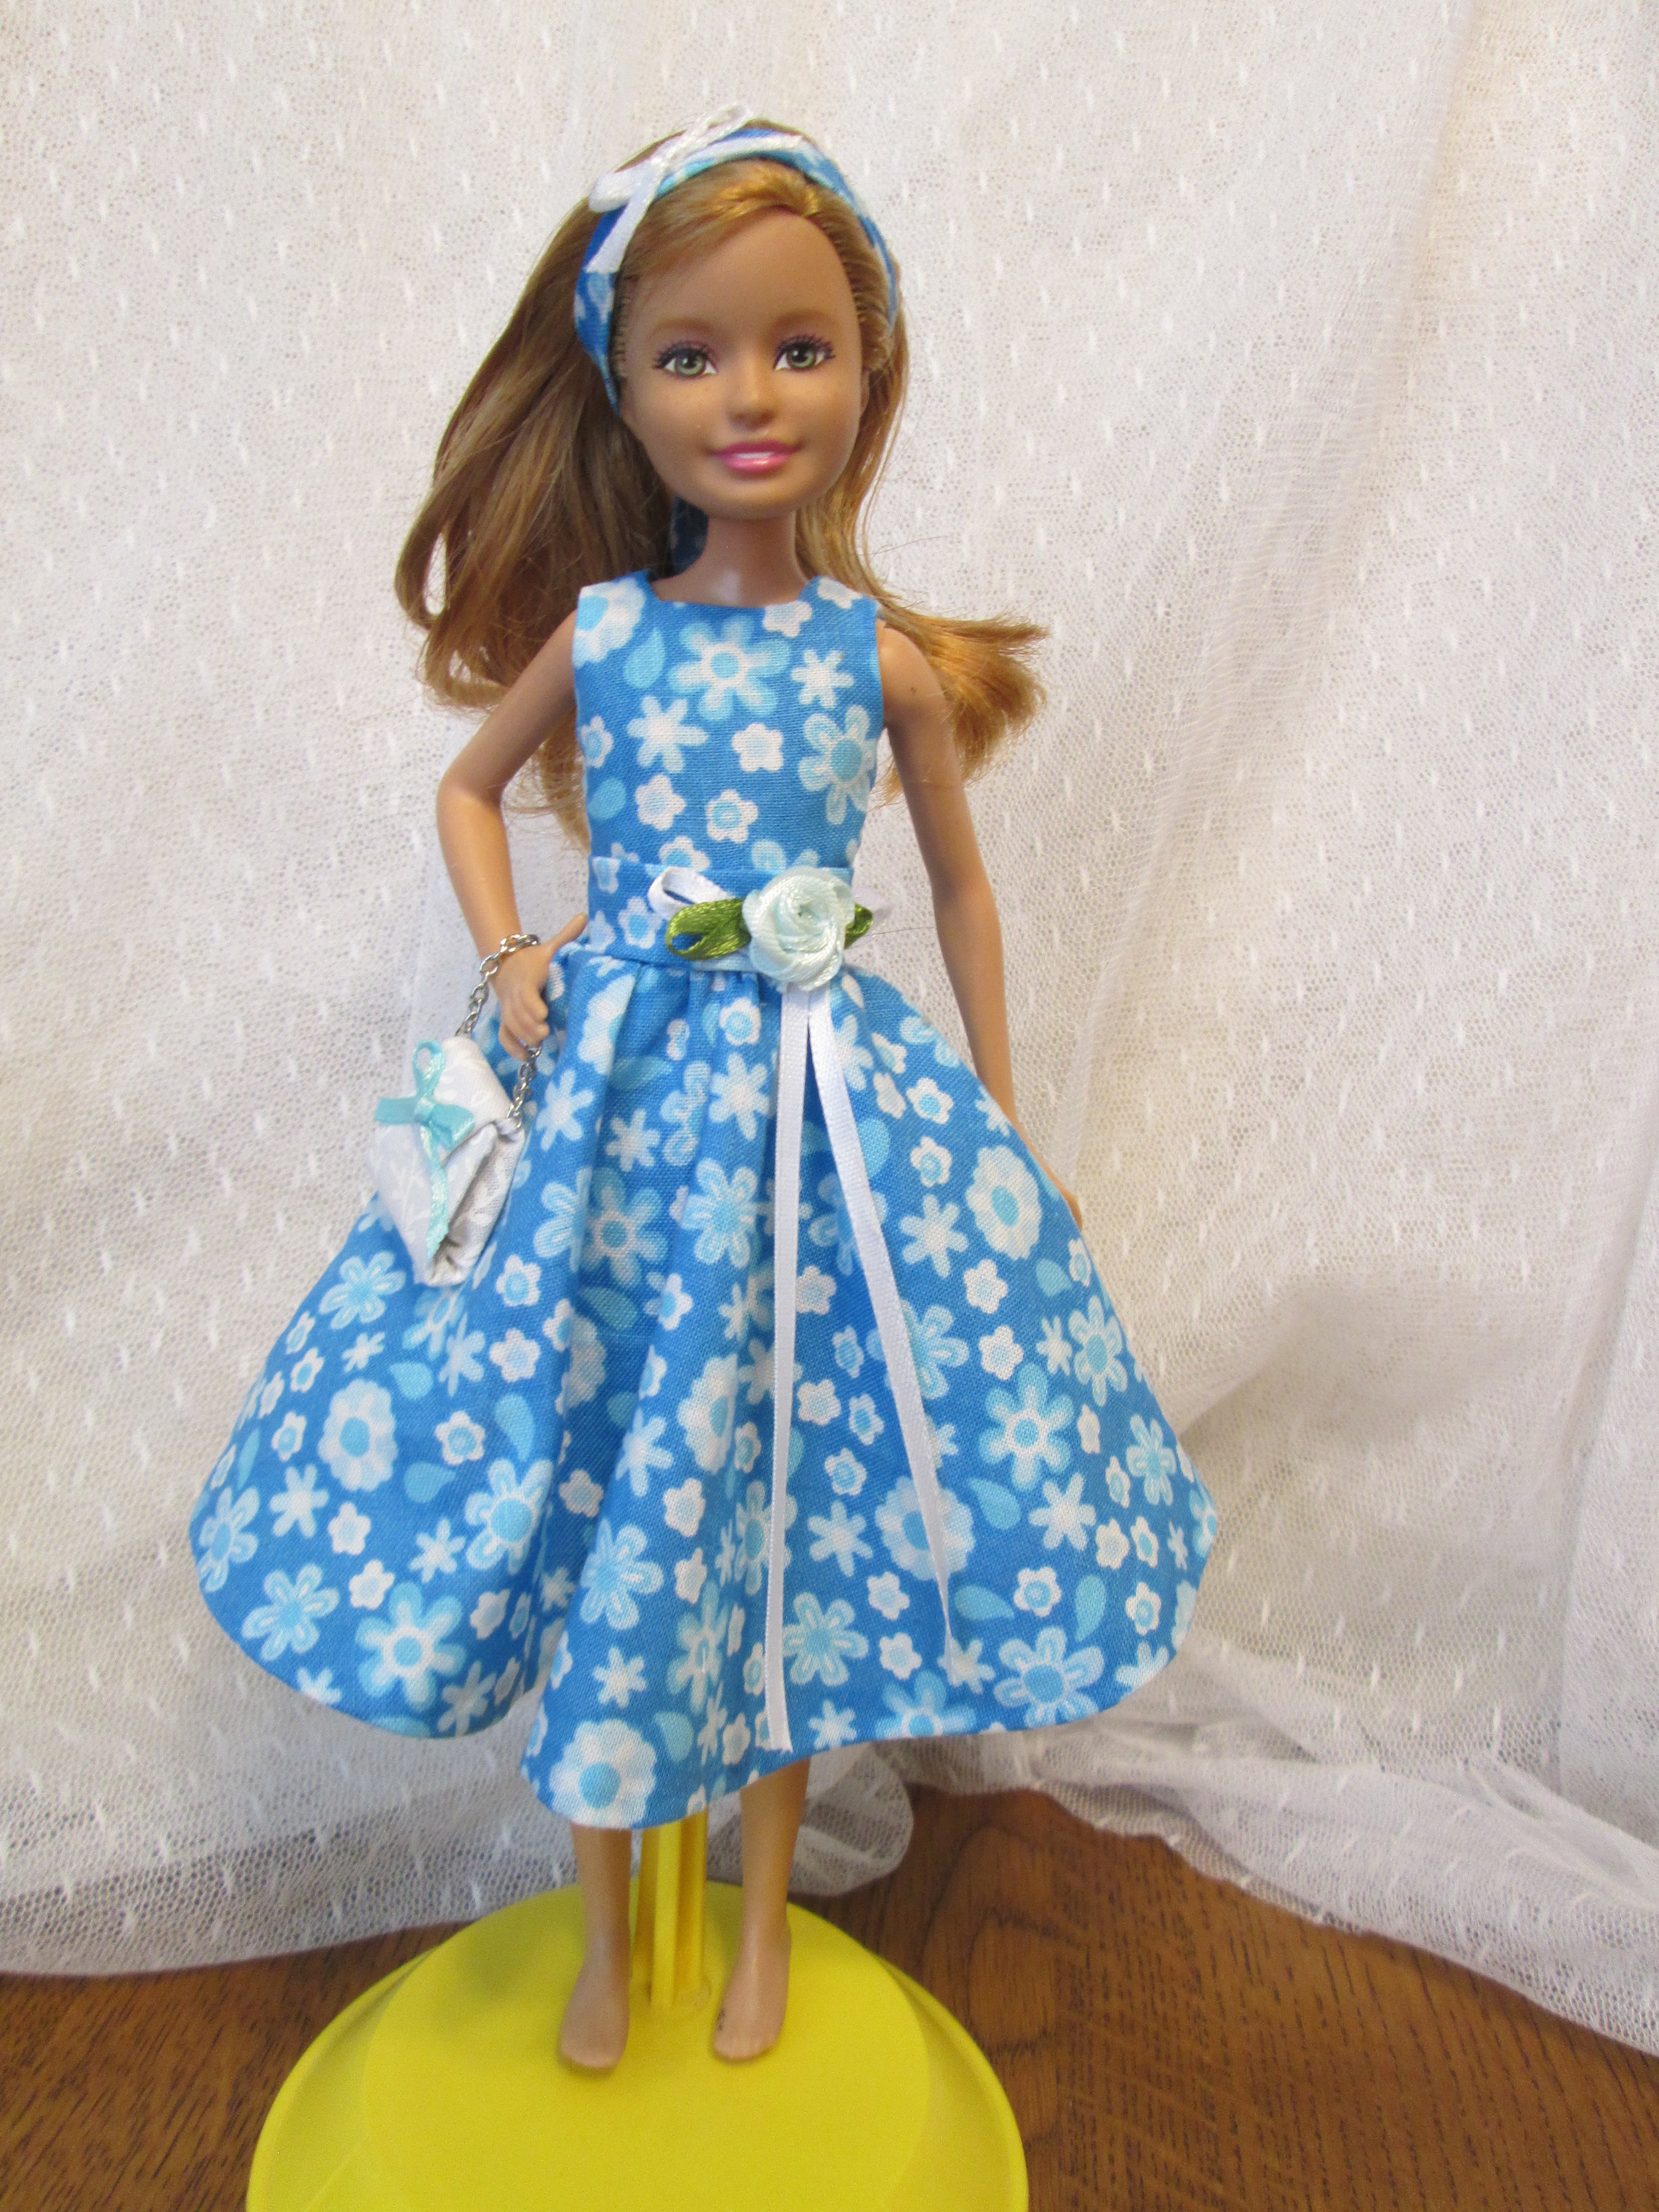 Handmade Stacie Doll Dresses and Accessories by JMB Designs